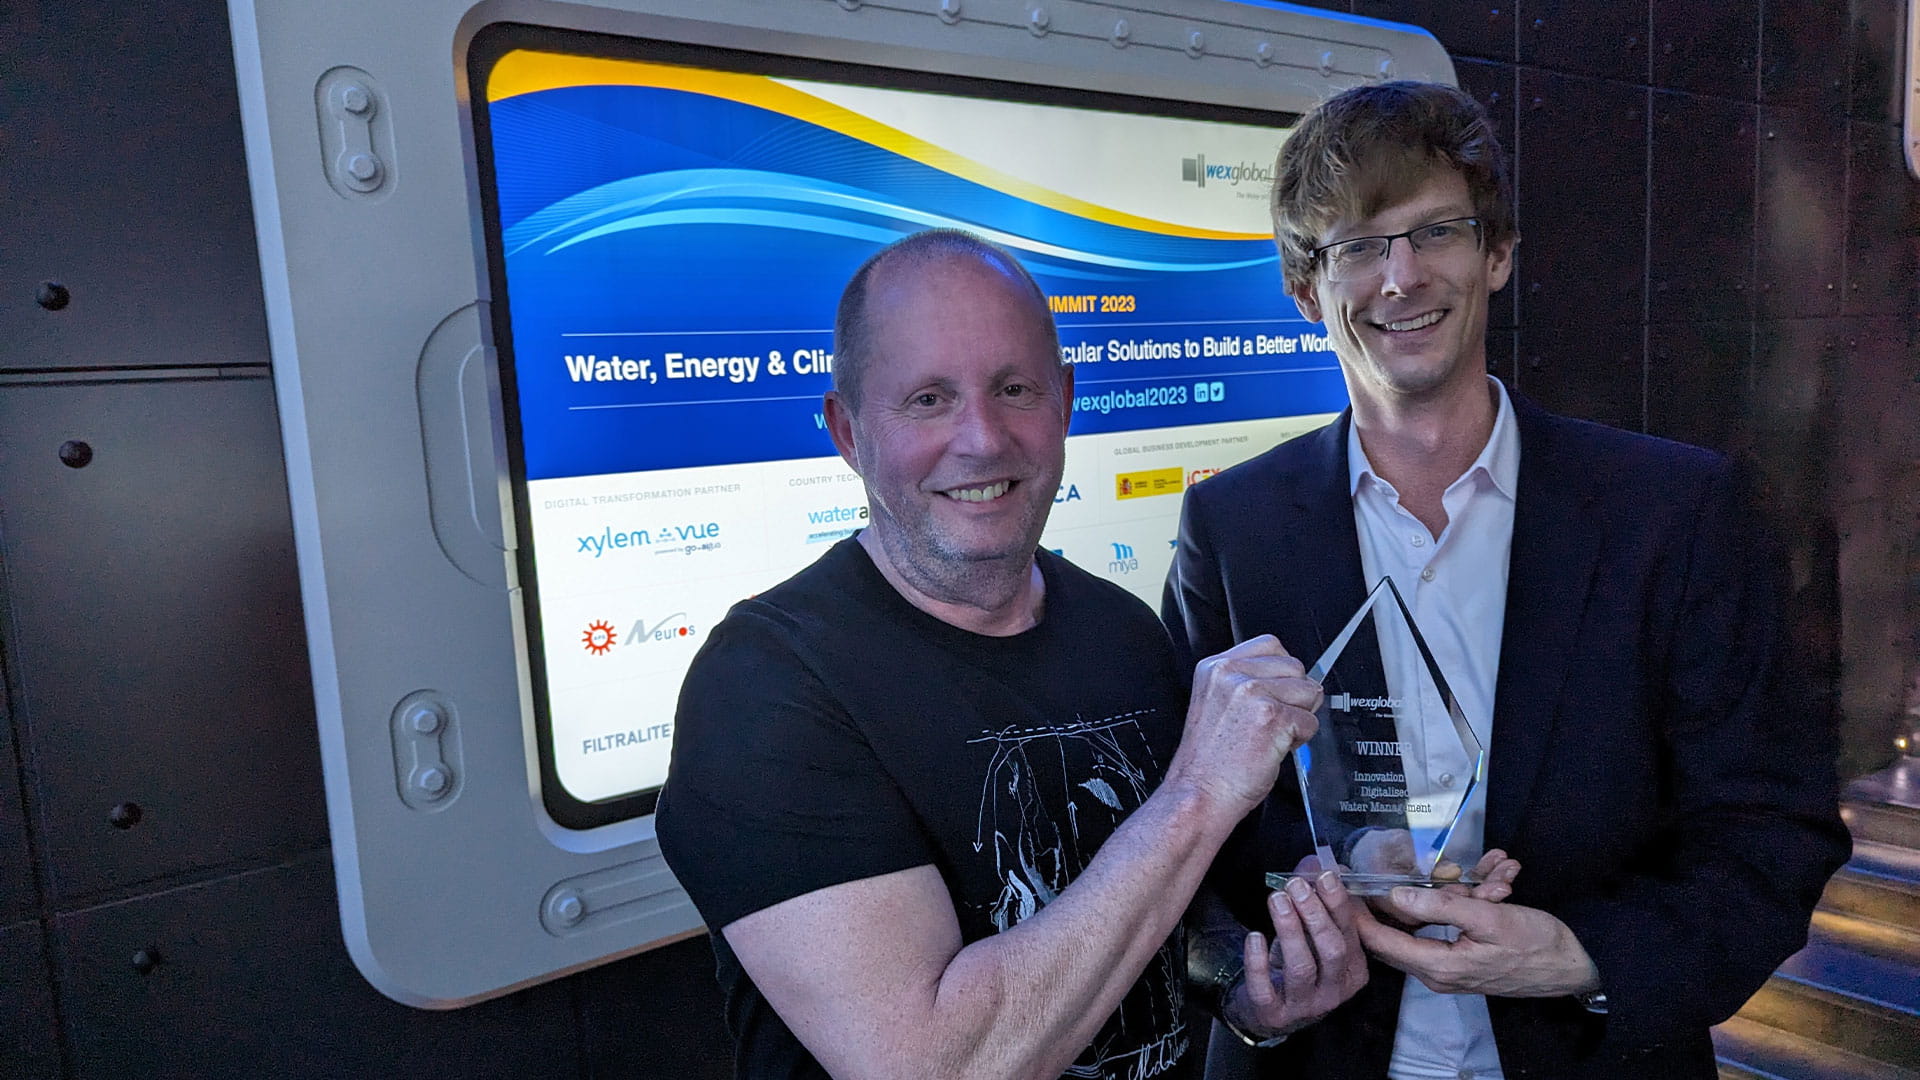 Award for the implementation of digital twin based on Twinn Aquasuite software